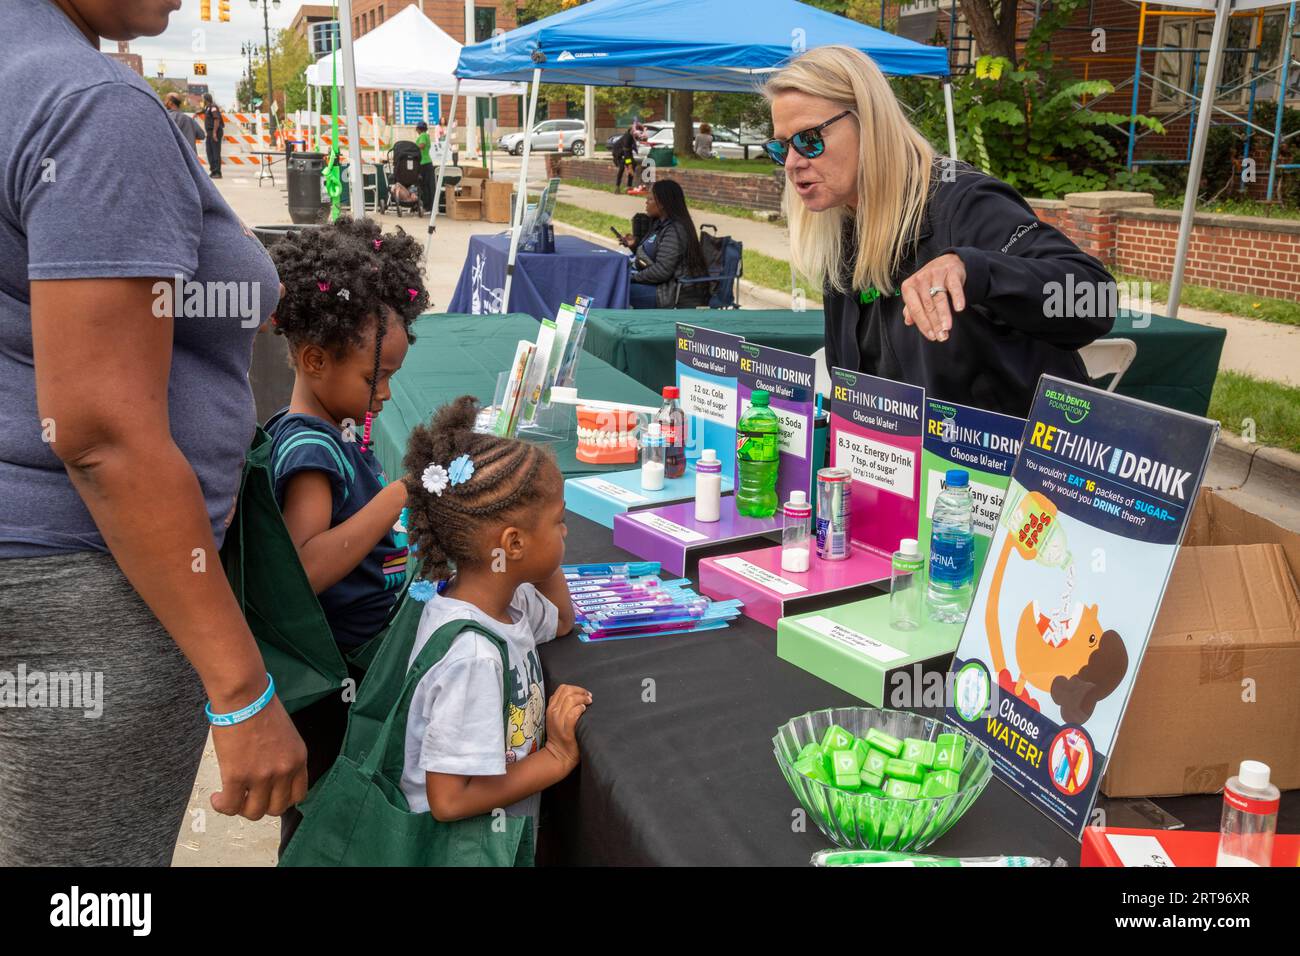 Detroit, Michigan - The Detroit Health Department held a well-attended block party, which offered healthy living advice, vaccines, health screening, a Stock Photo